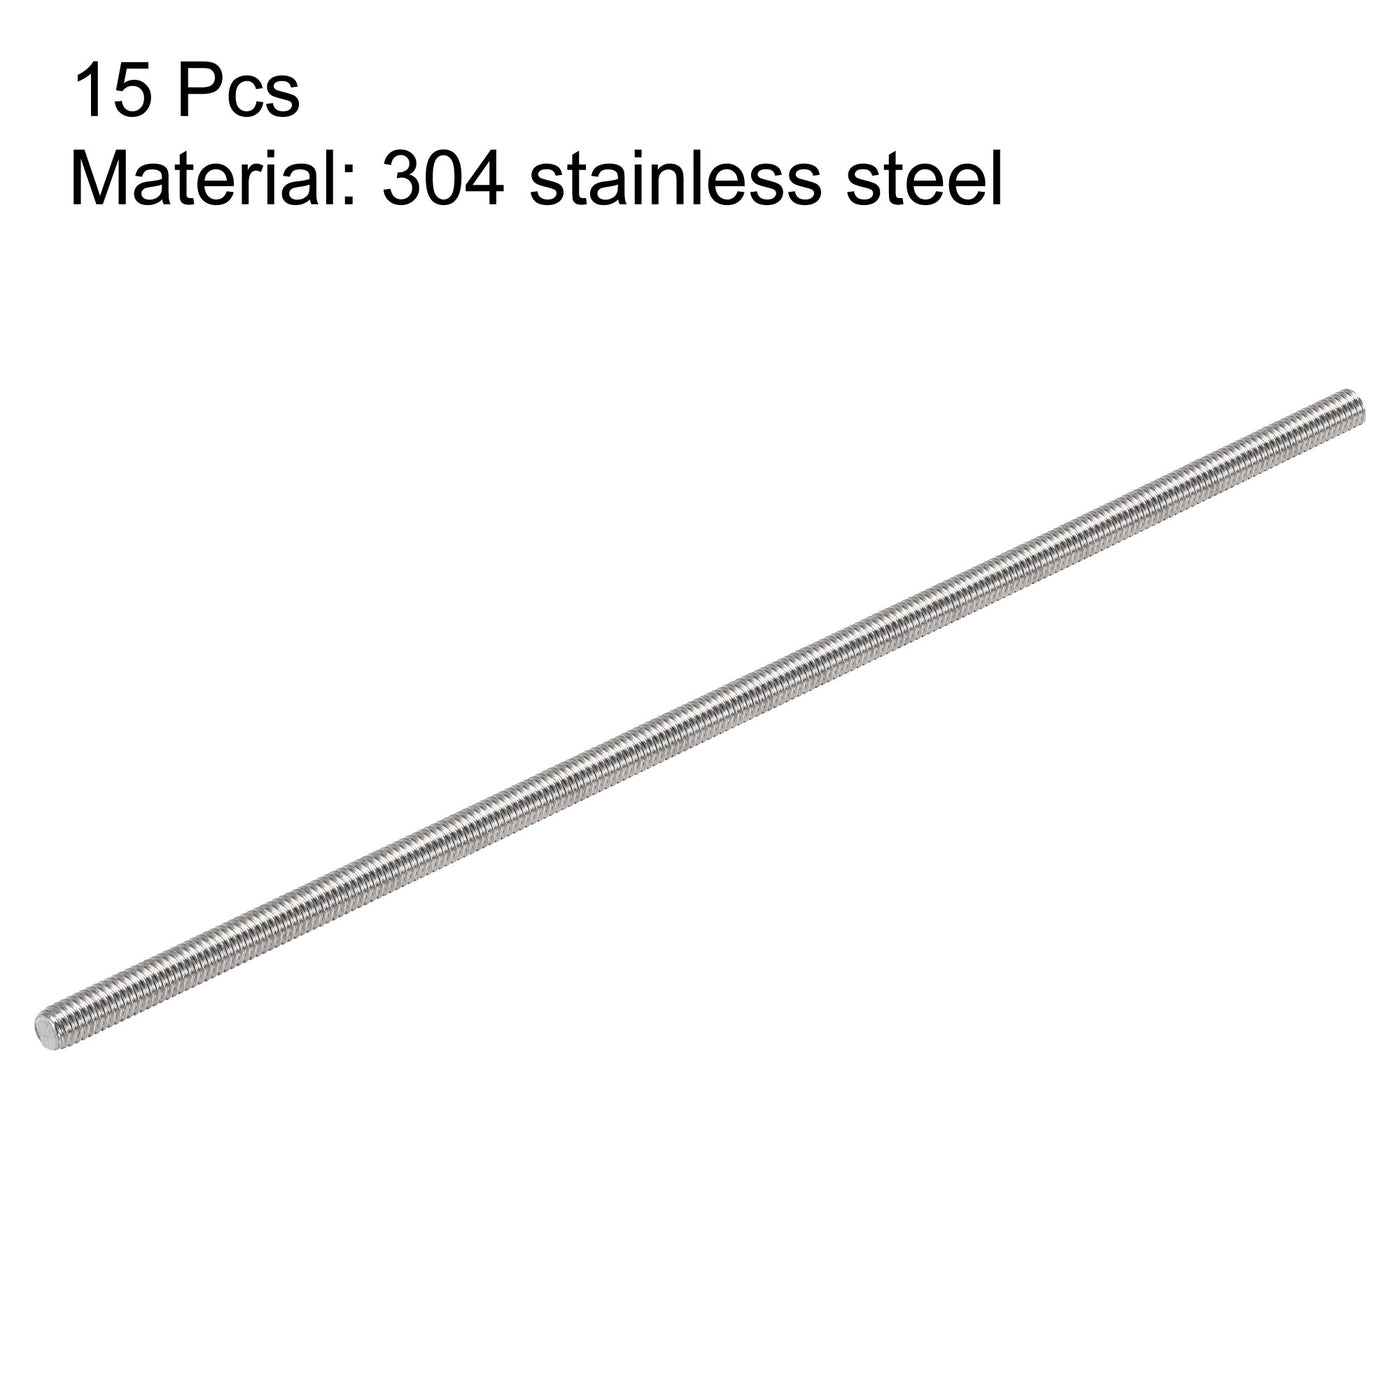 uxcell Uxcell 15pcs M3 x 100mm Fully Threaded Rod 304 Stainless Steel Right Hand 0.5mm Pitch